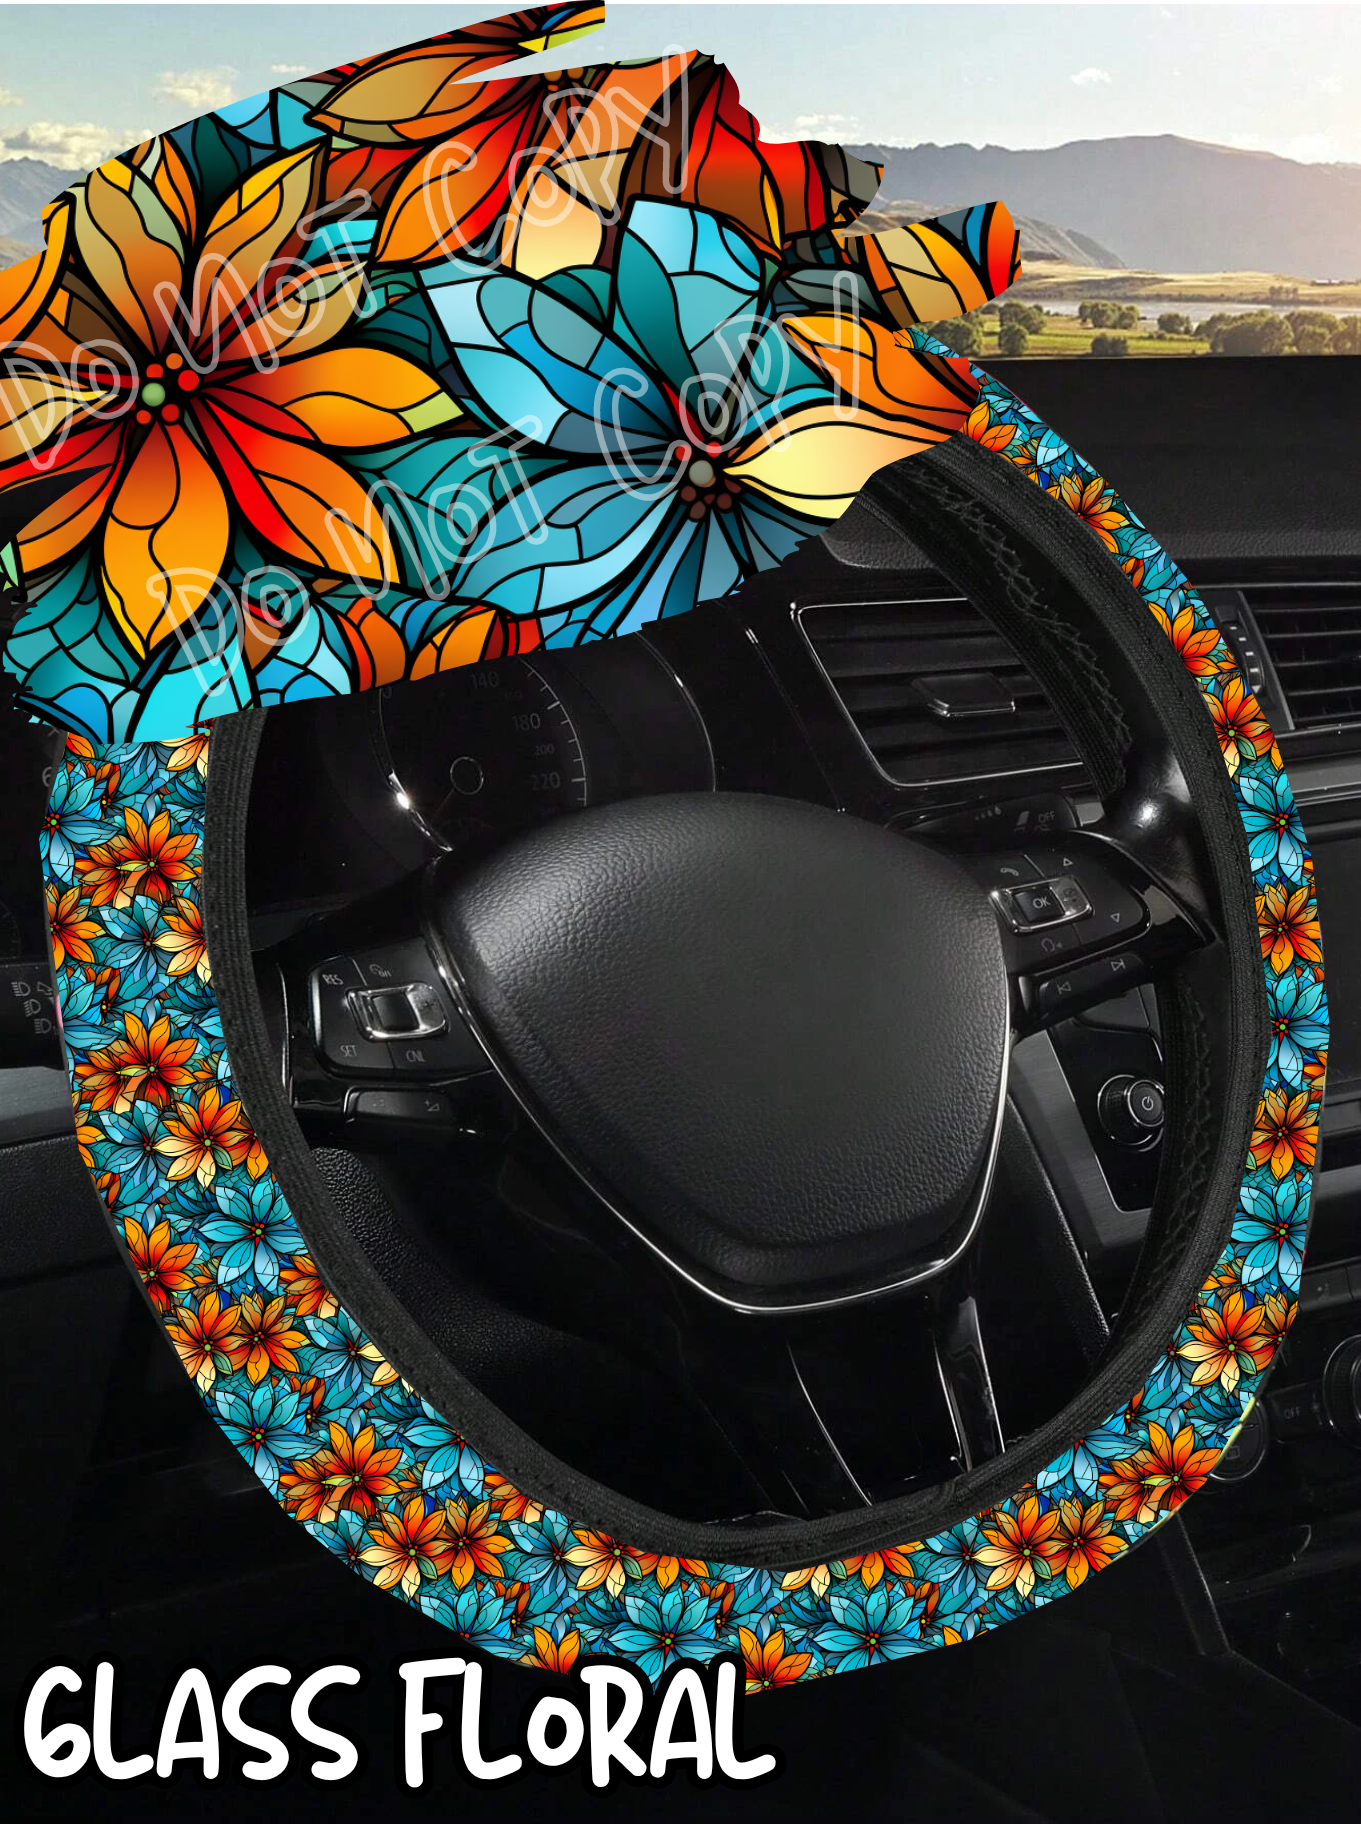 Glass Floral - Steering Wheel Cover Preorder Round 3 Closing 10/25 ETA Early Dec